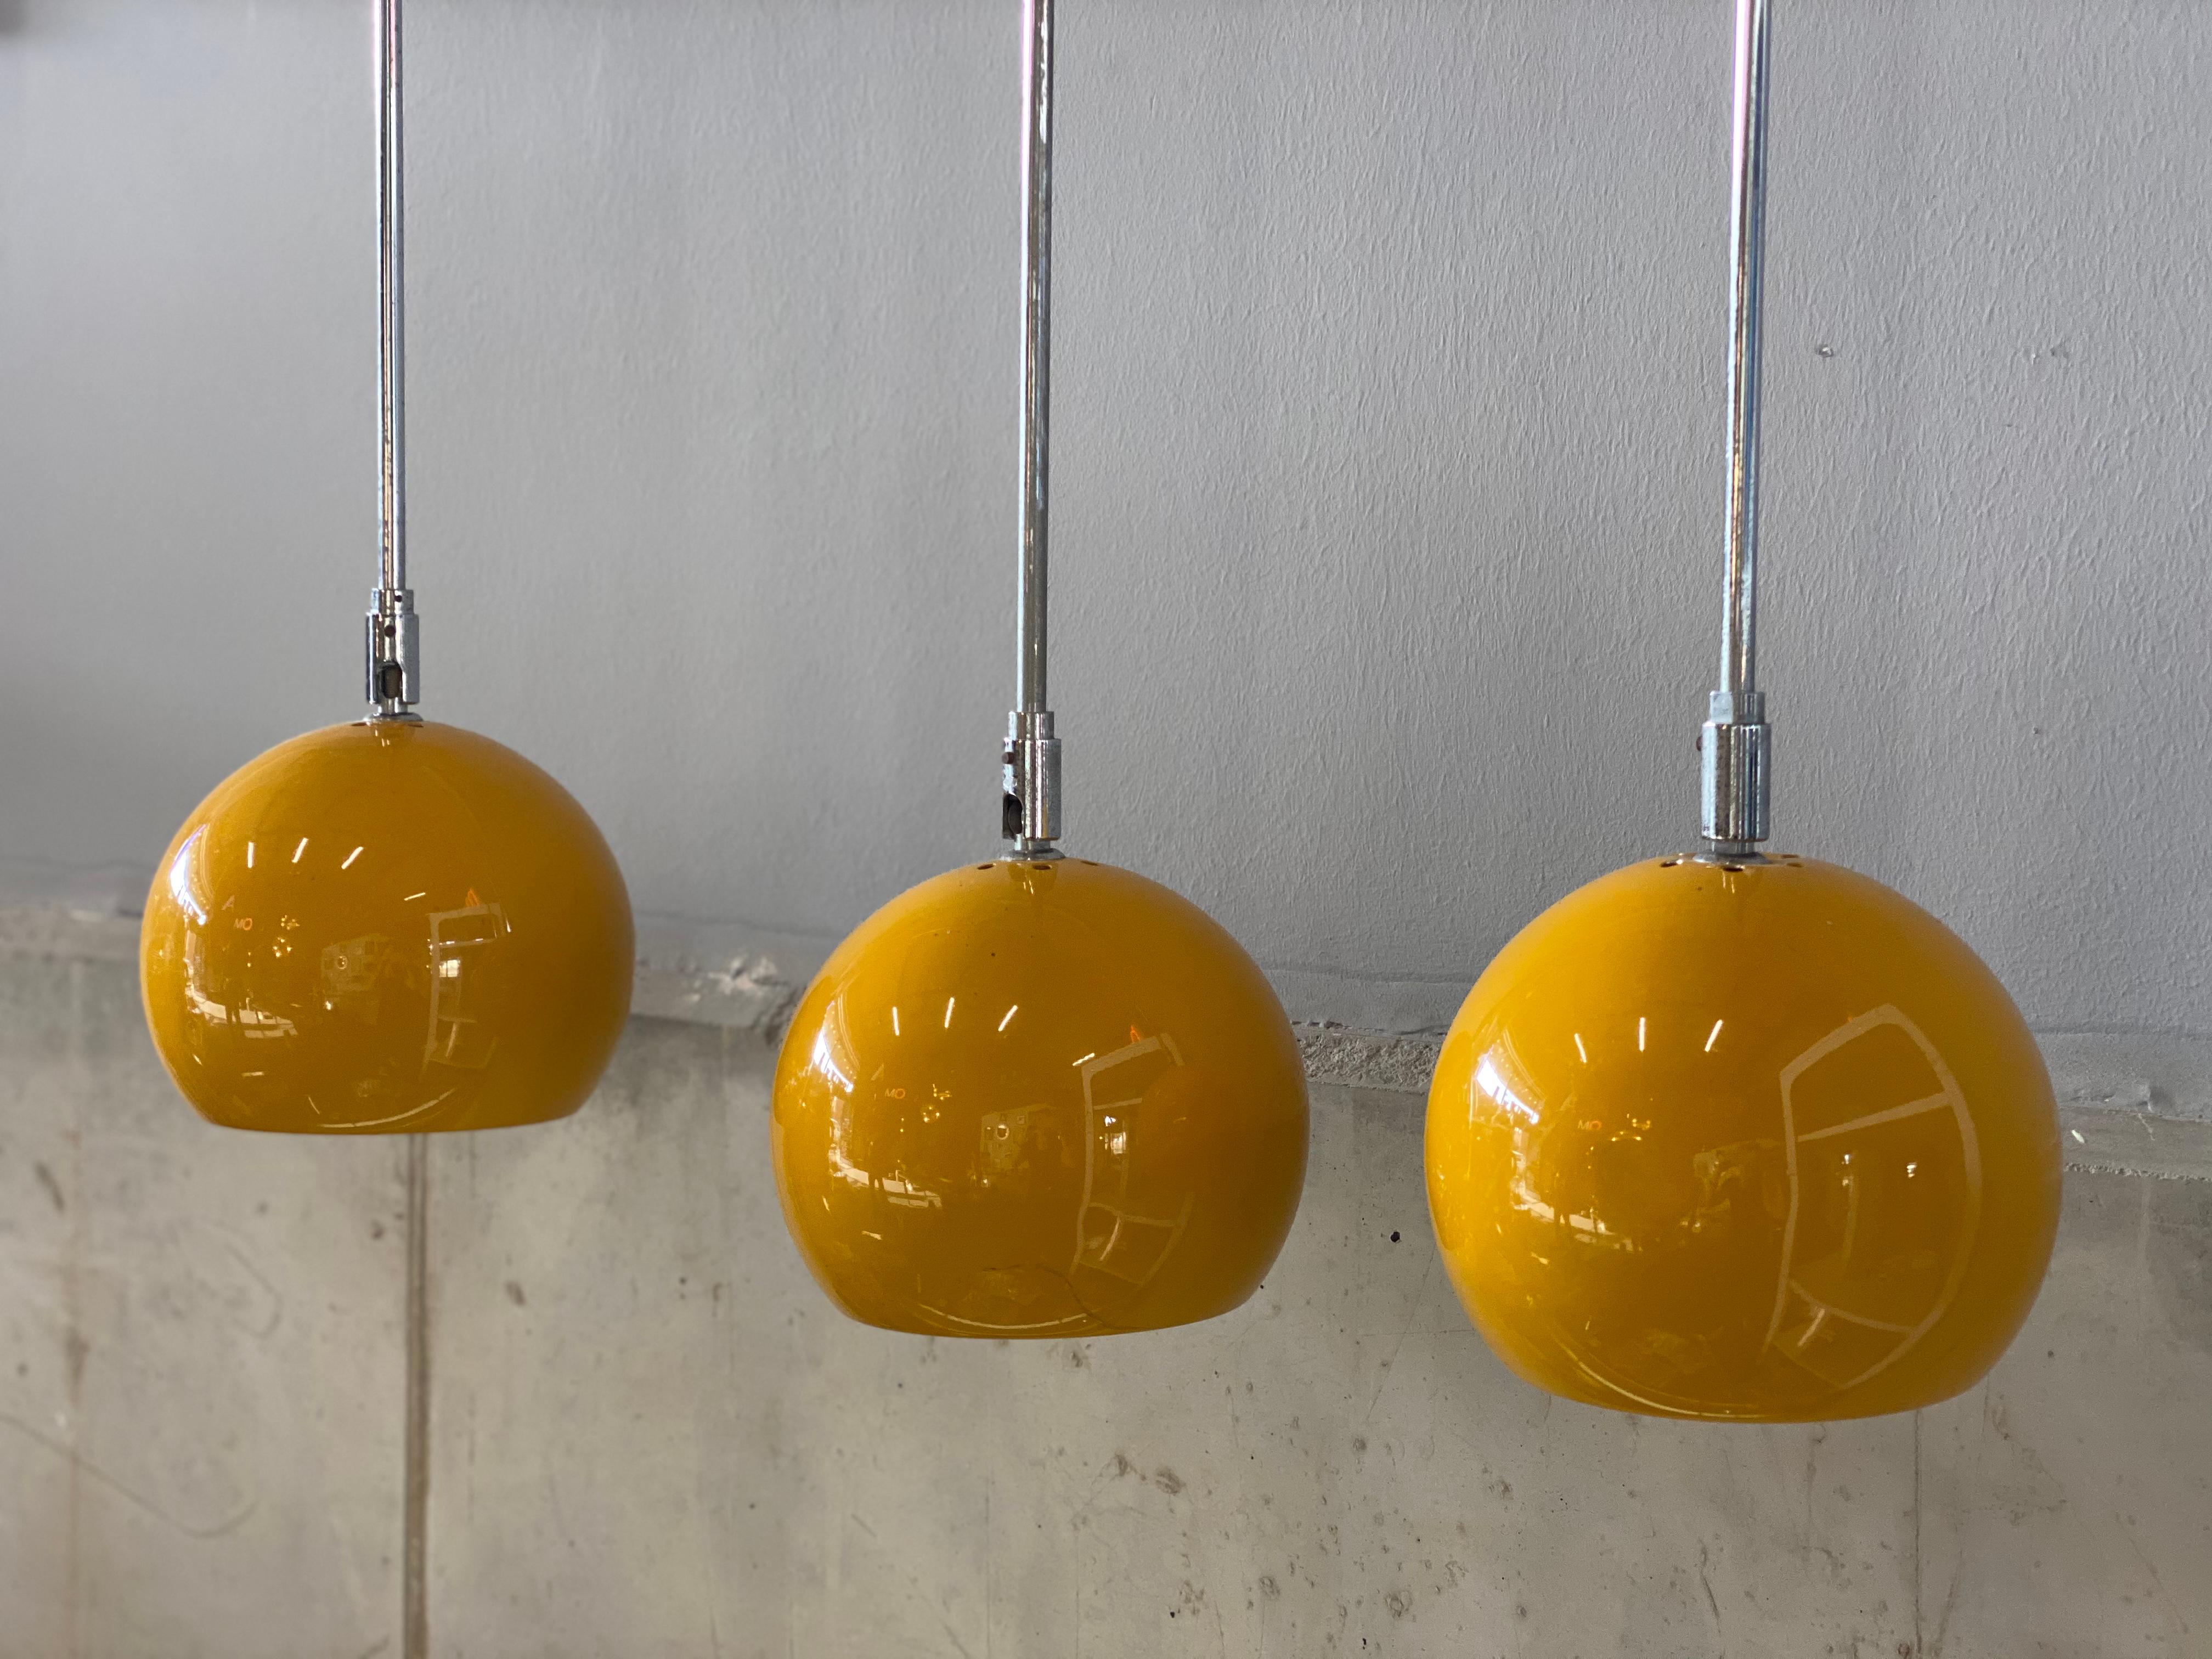 These 3 yellow ball lights bring the flowery colorful vibe of the 1970s into your four walls. The spheres can also be tilted and angled and can therefore also be used as a spotlight. The sunny yellow trio looks great in a dark hallway or even